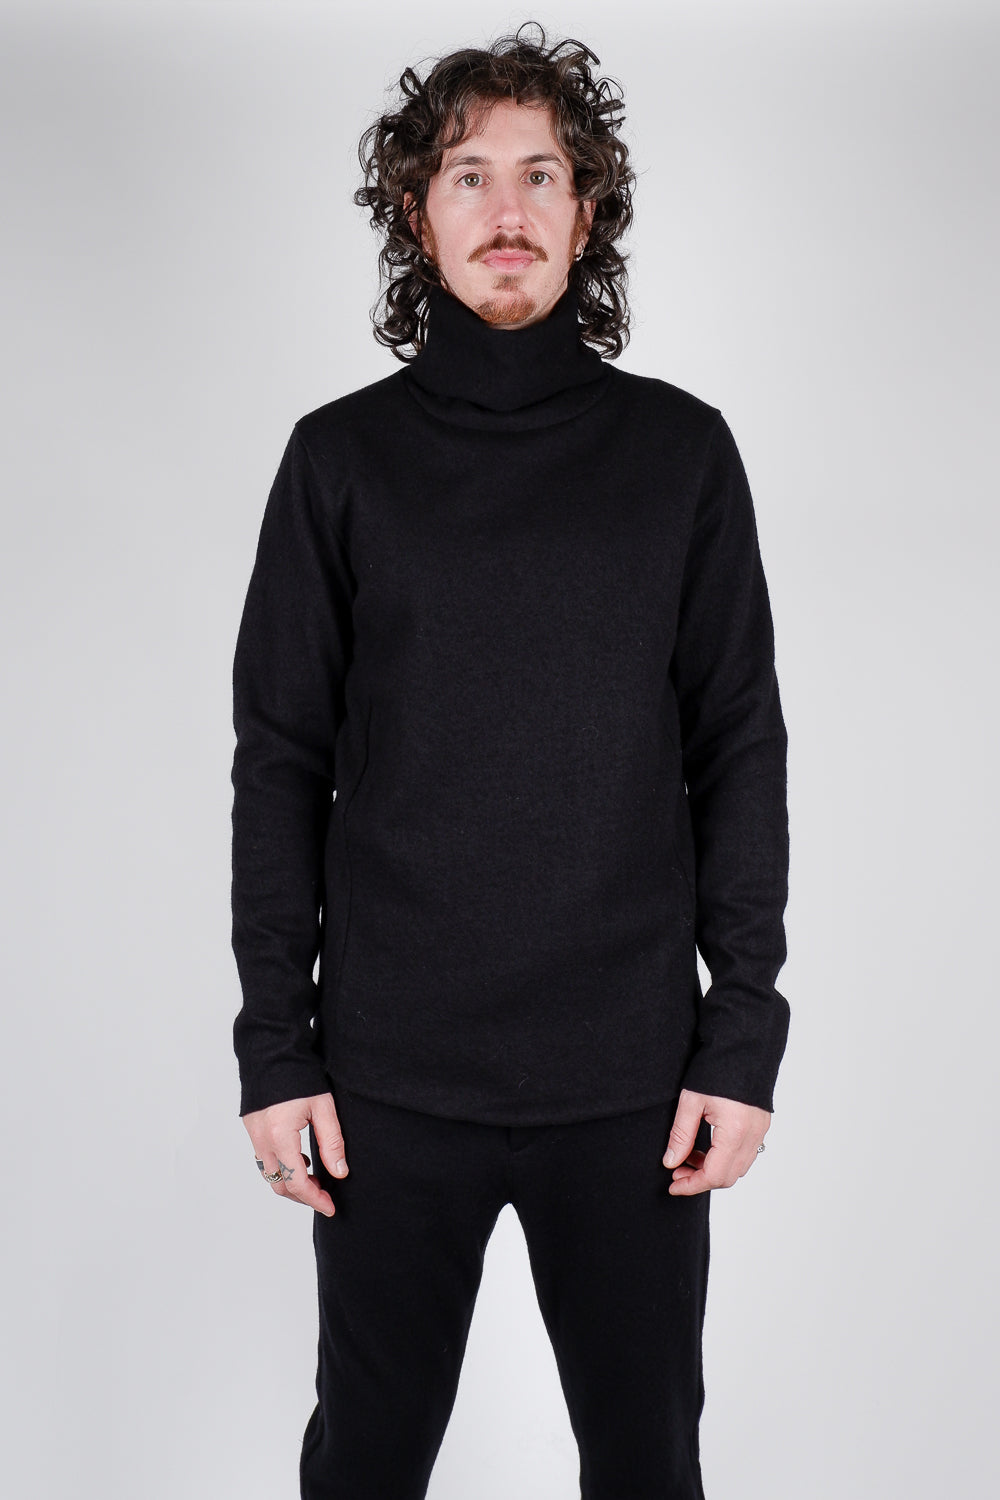 Buy the Hannes Roether Boiled Wool Roll Neck Knit in Black at Intro. Spend £50 for free UK delivery. Official stockists. We ship worldwide.